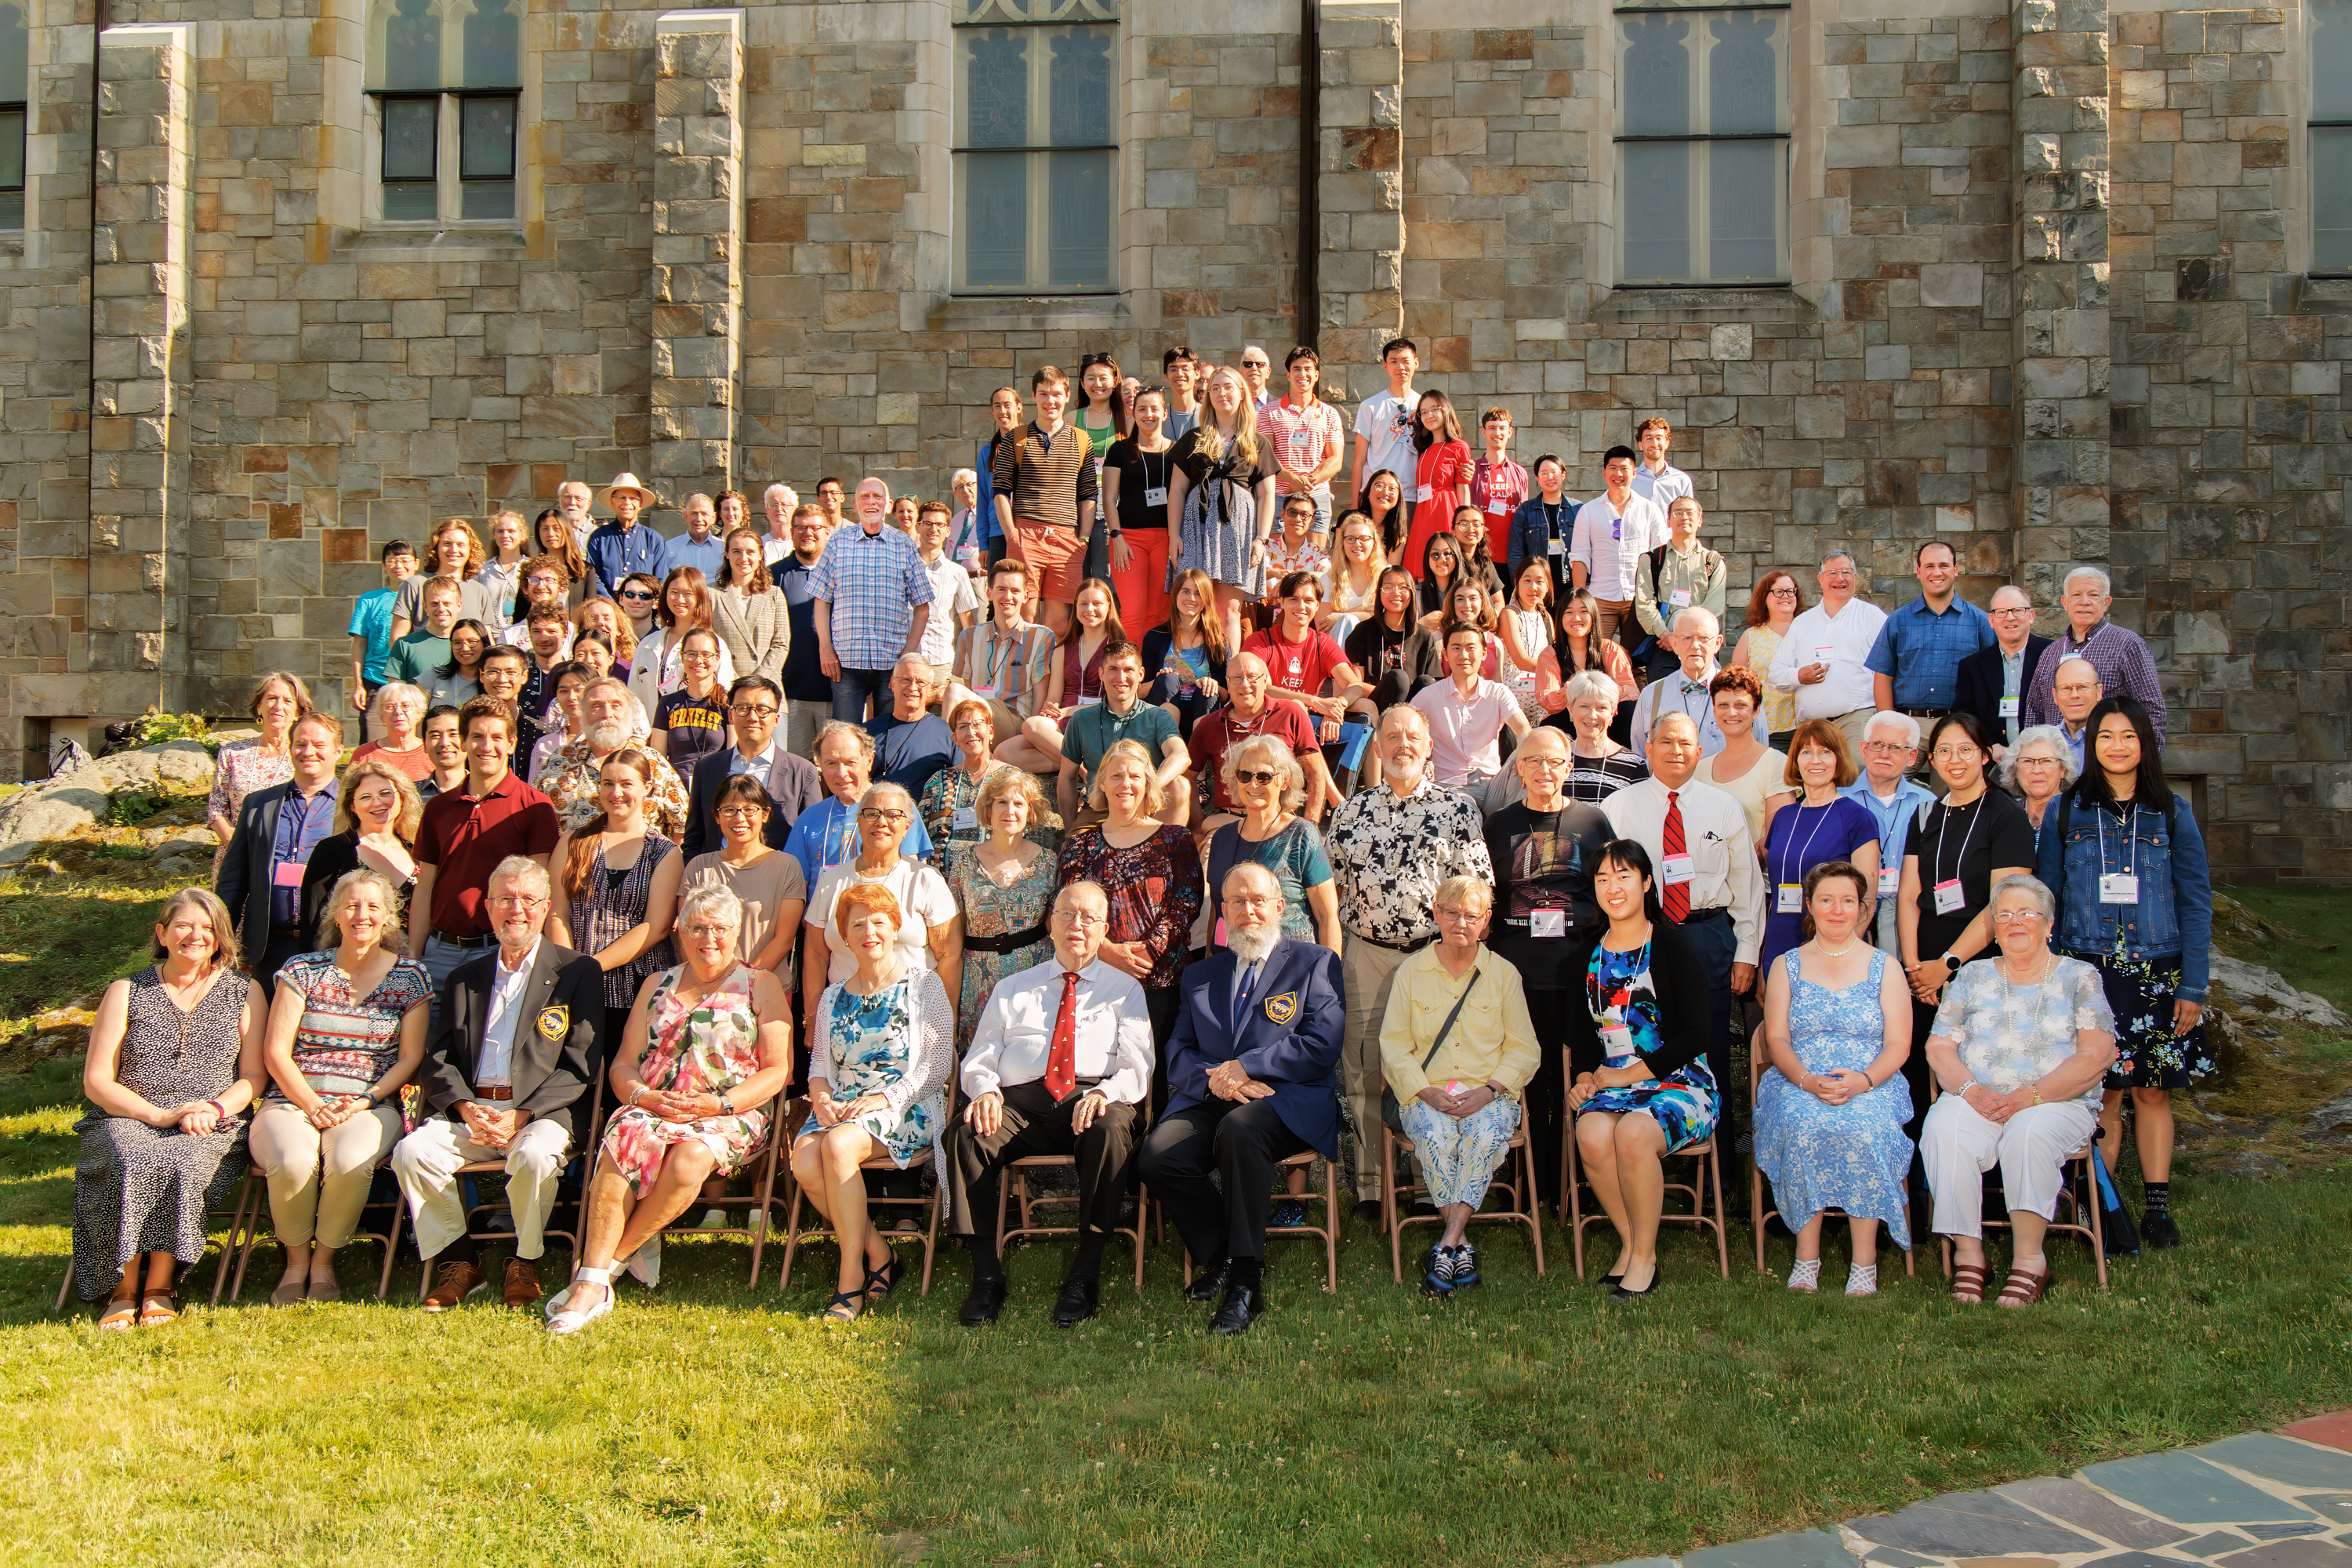 Group photo of the 2023 GCNA Congress attendees in Cohasset, Massachusetts